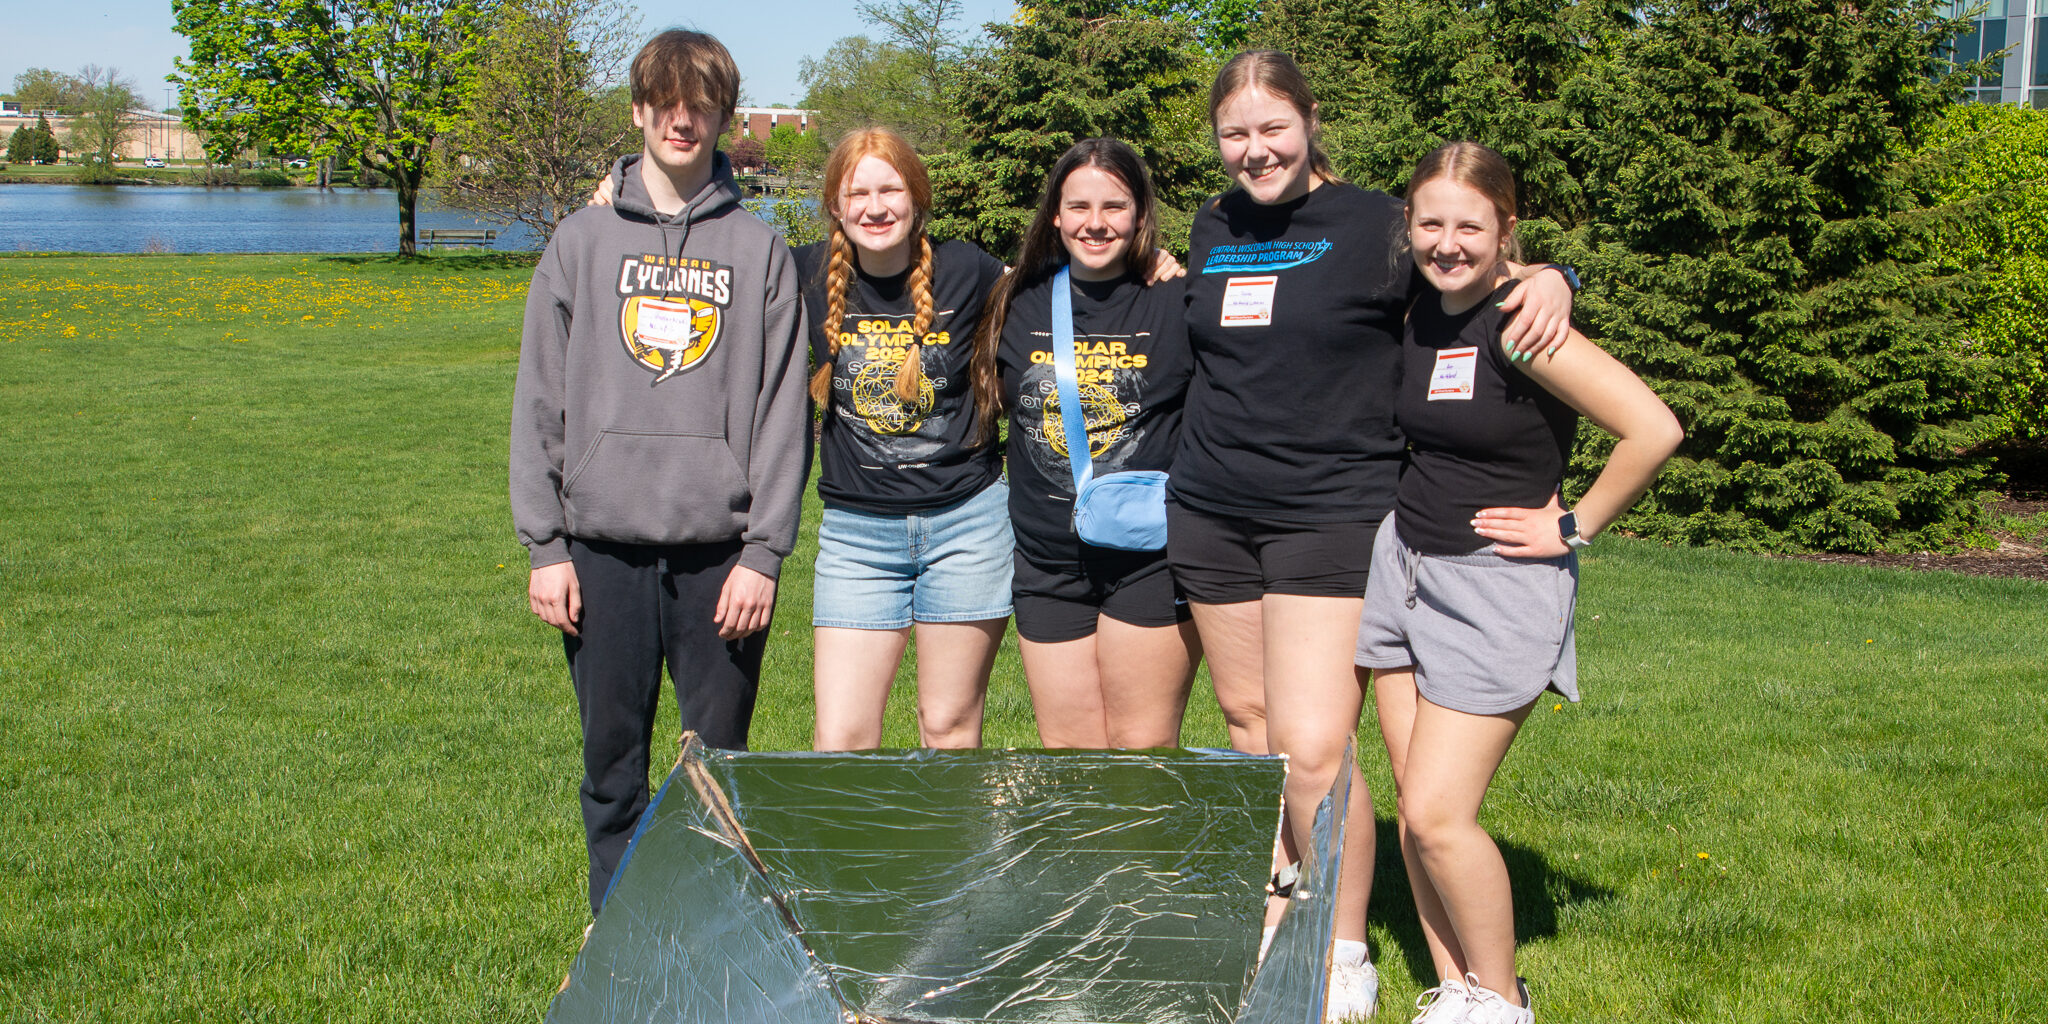 A group of high school students takes a photo behind a solar-powered cooker on a sunny day.